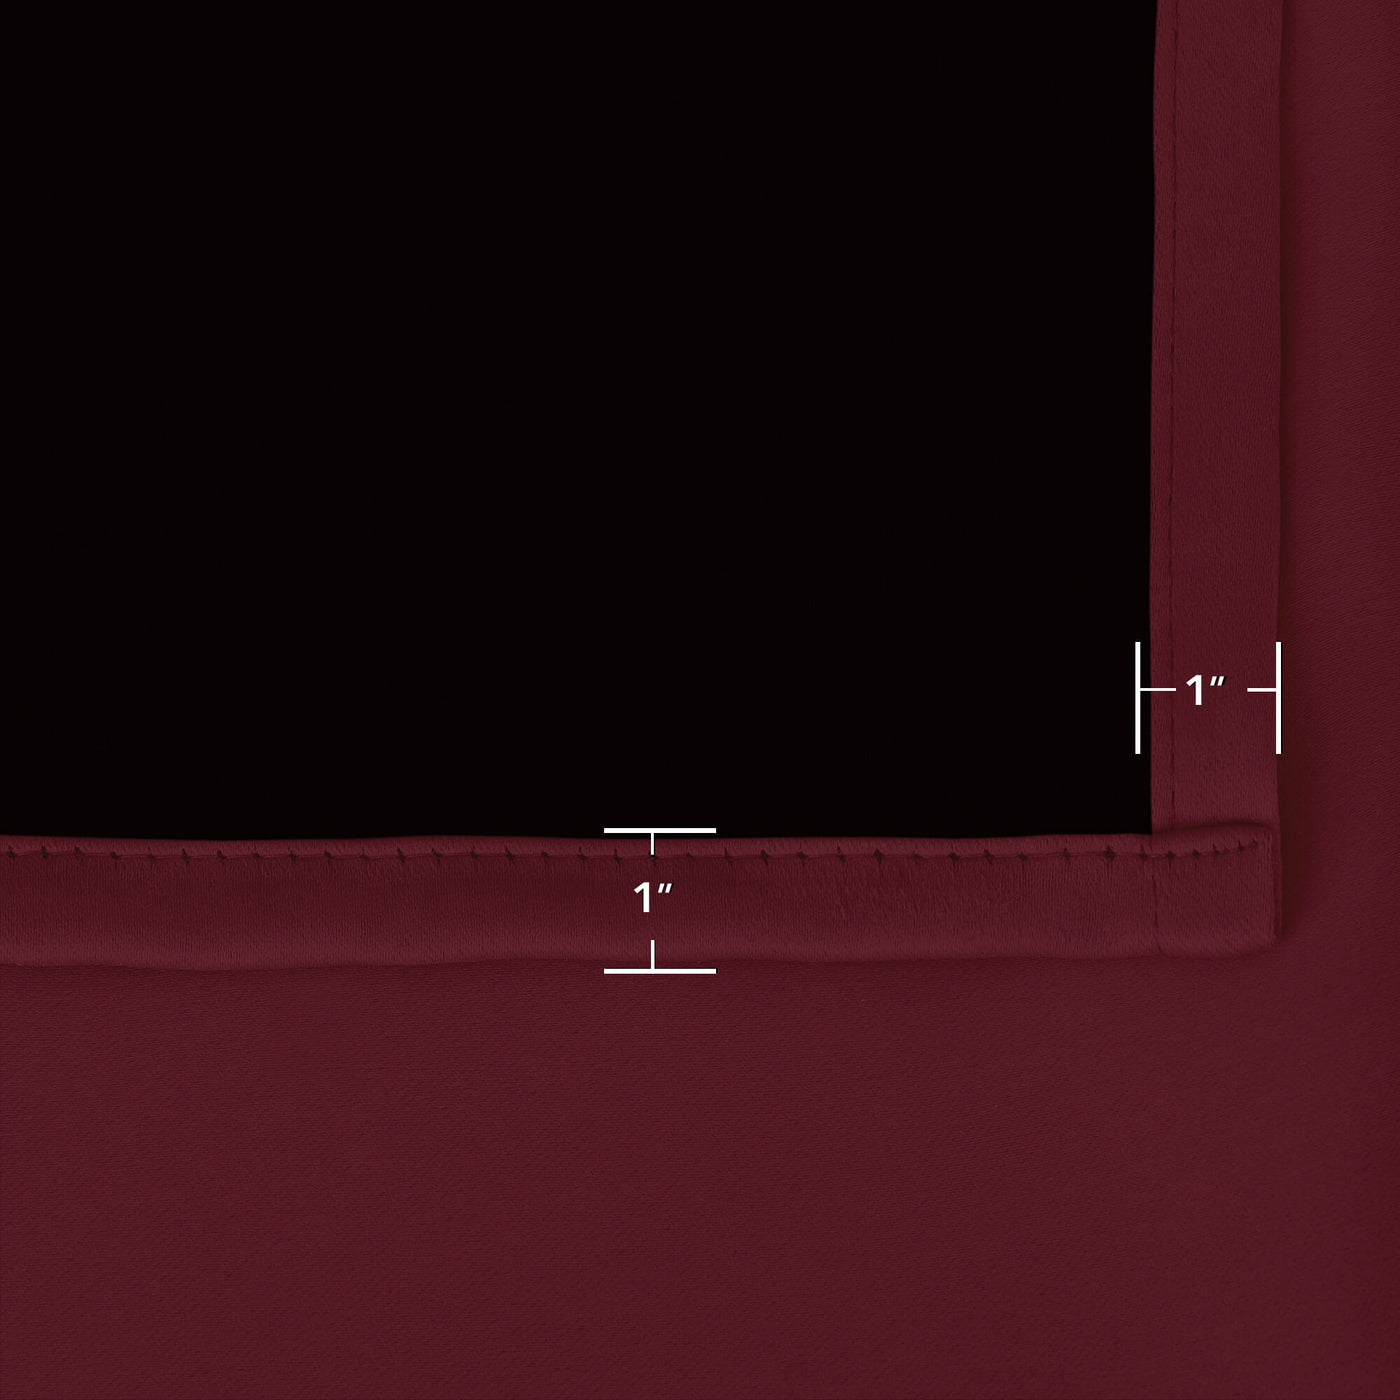 Heartcosy Blackout Curtains Wine Red - Grommet Top & Bottom